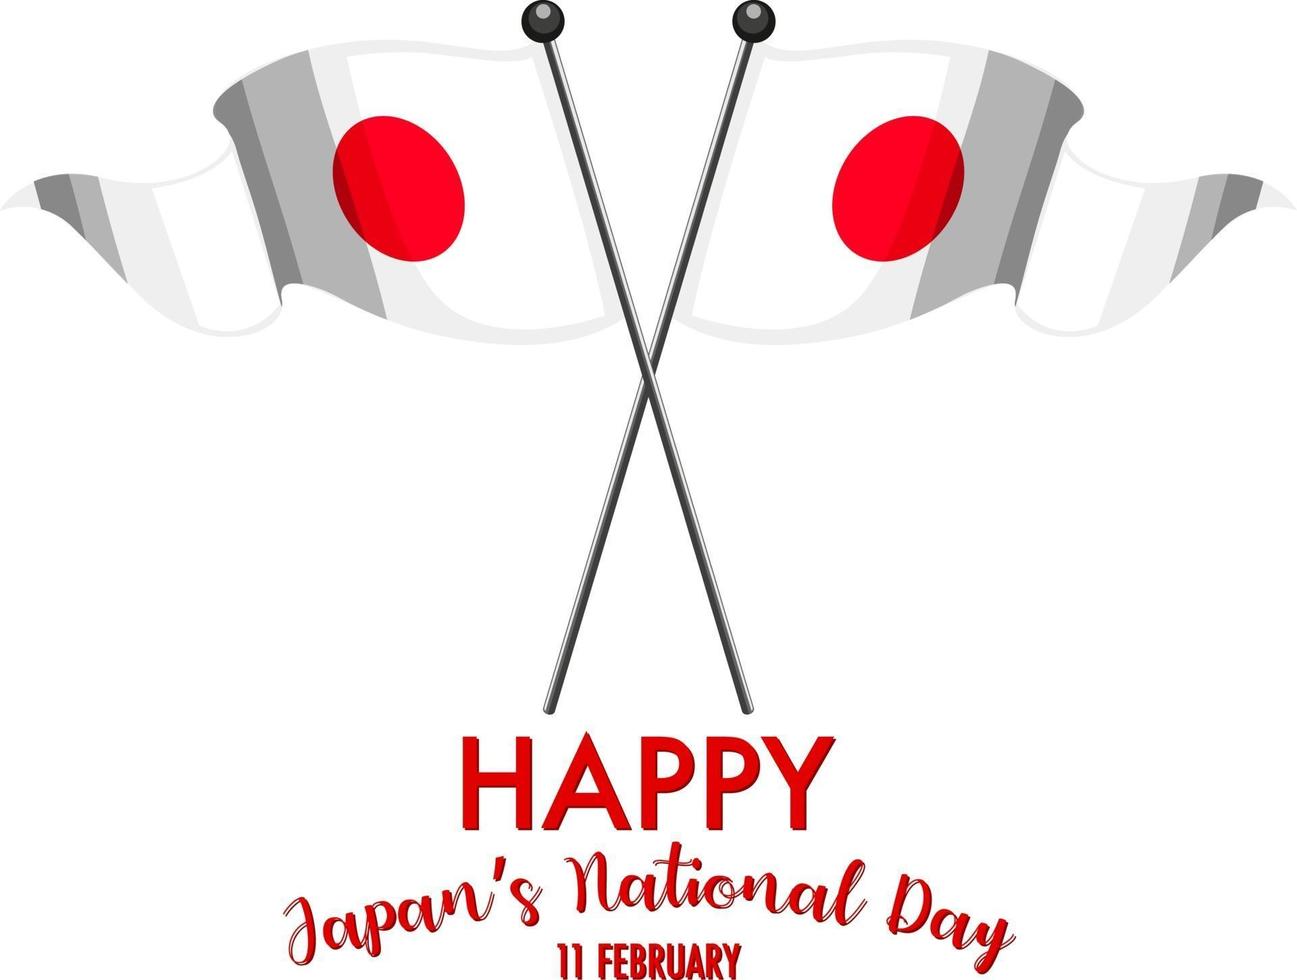 Happy Japan's National Day Banner with Flag of Japan vector